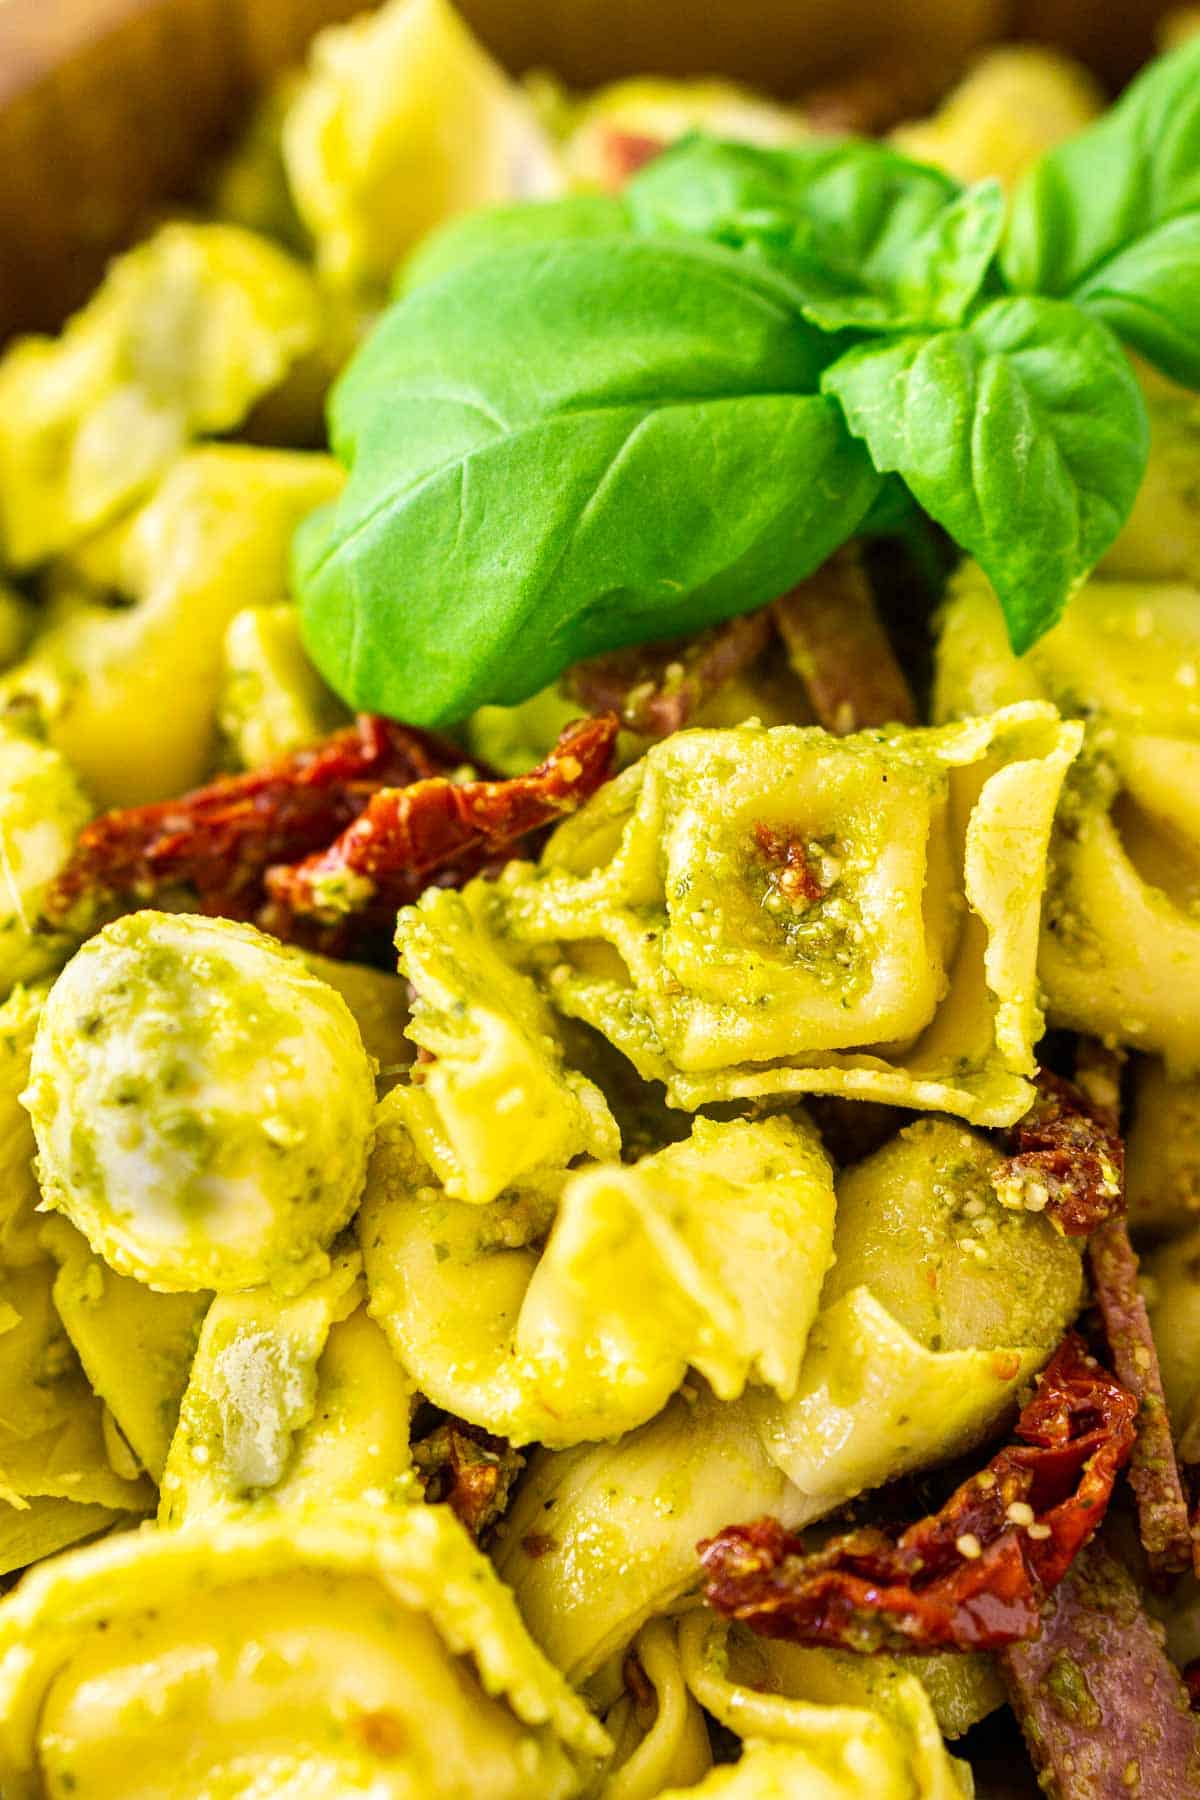 A close-up shot of the pesto tortellini salad with a focus on a piece of pasta.